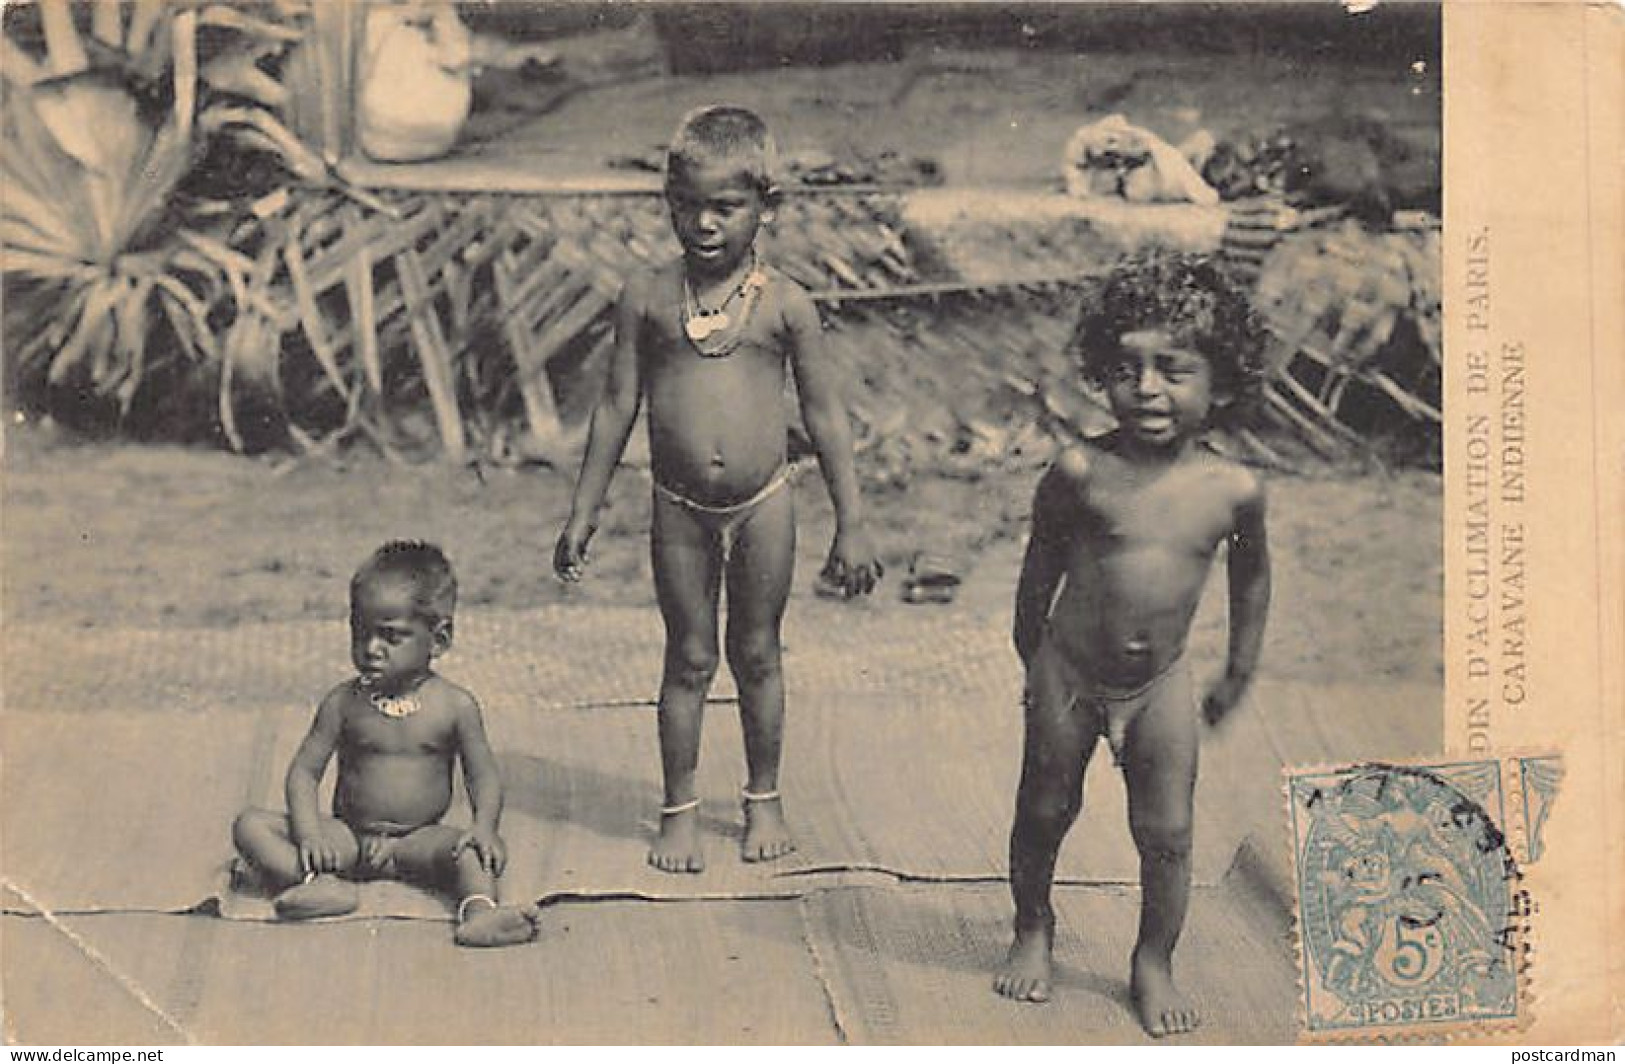 India - The Malabars - Children (ethnic Group Of South Indian Tamil) In The Jardin D'acclimatation In Paris (France) - Inde